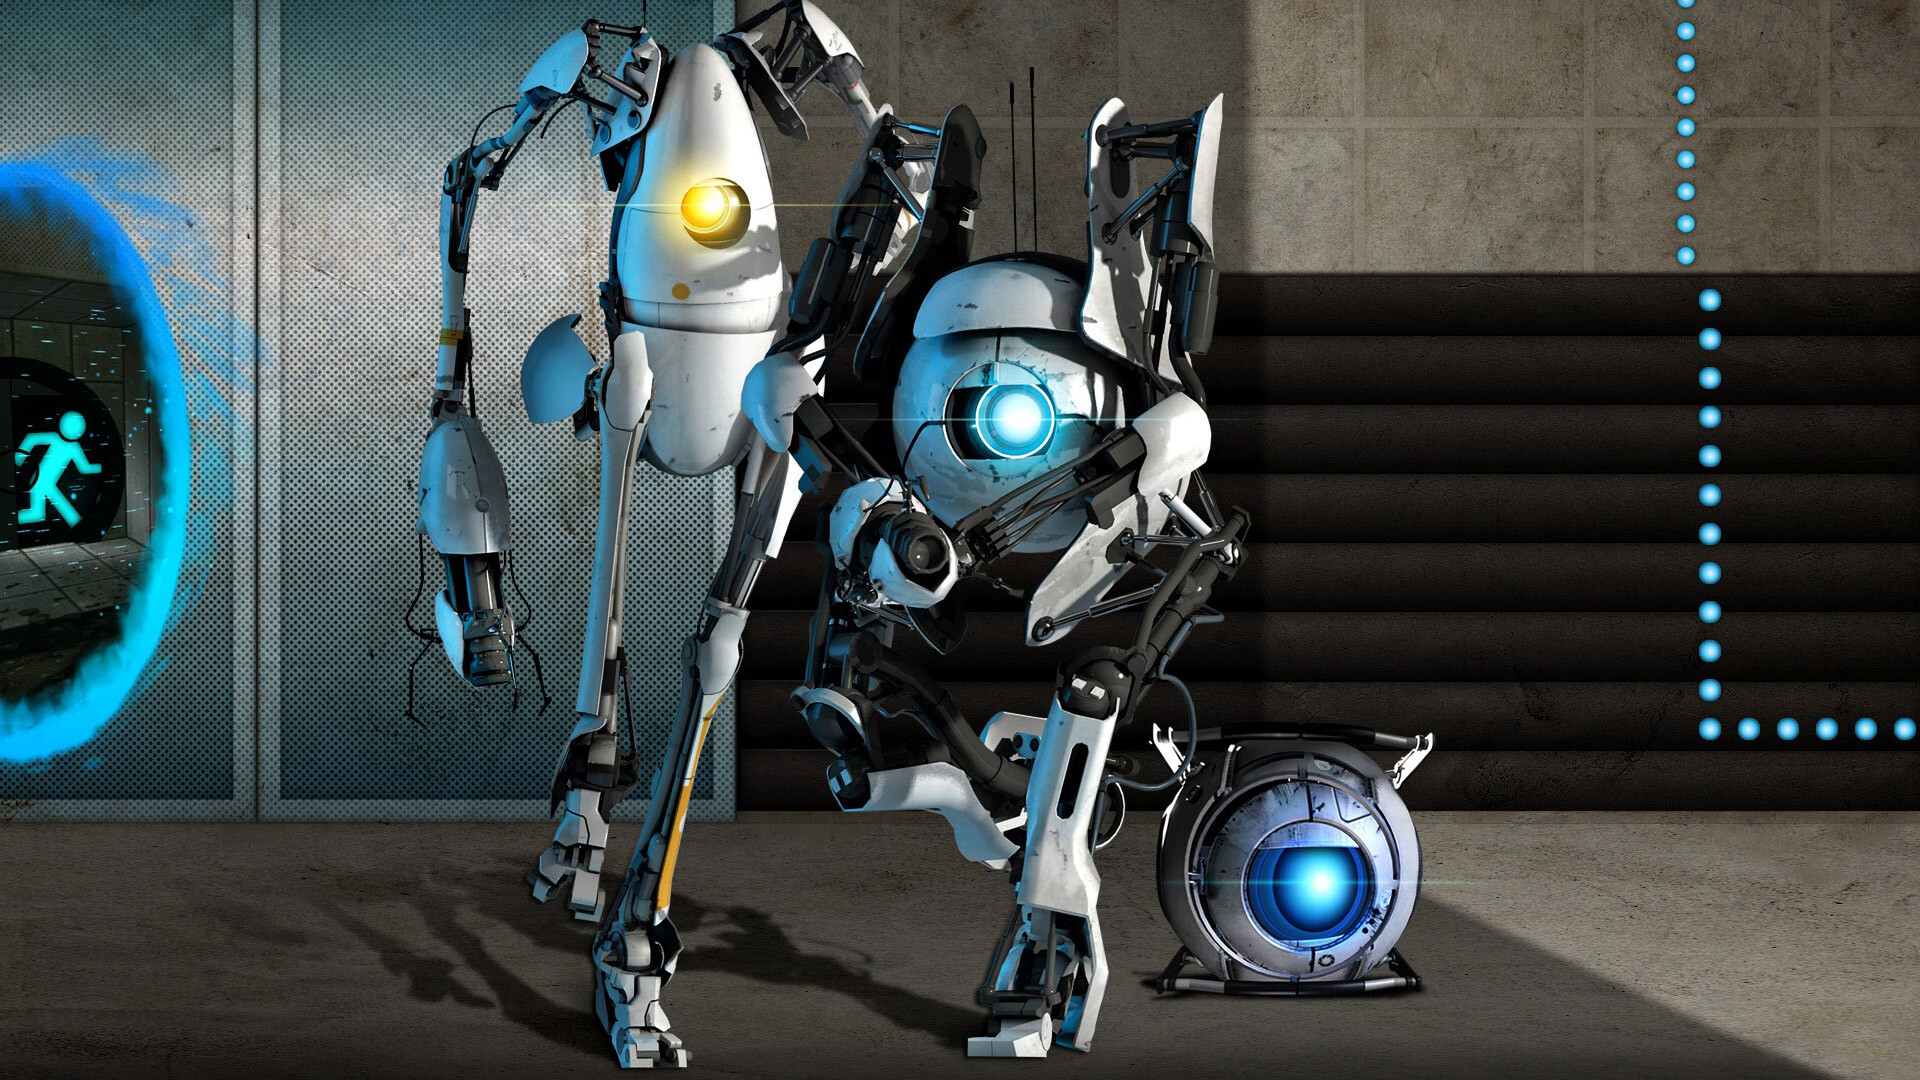 Portal 2 (Game): The player takes the role of a simplistic humanoid icon in community-developed puzzles. 1920x1080 Full HD Wallpaper.